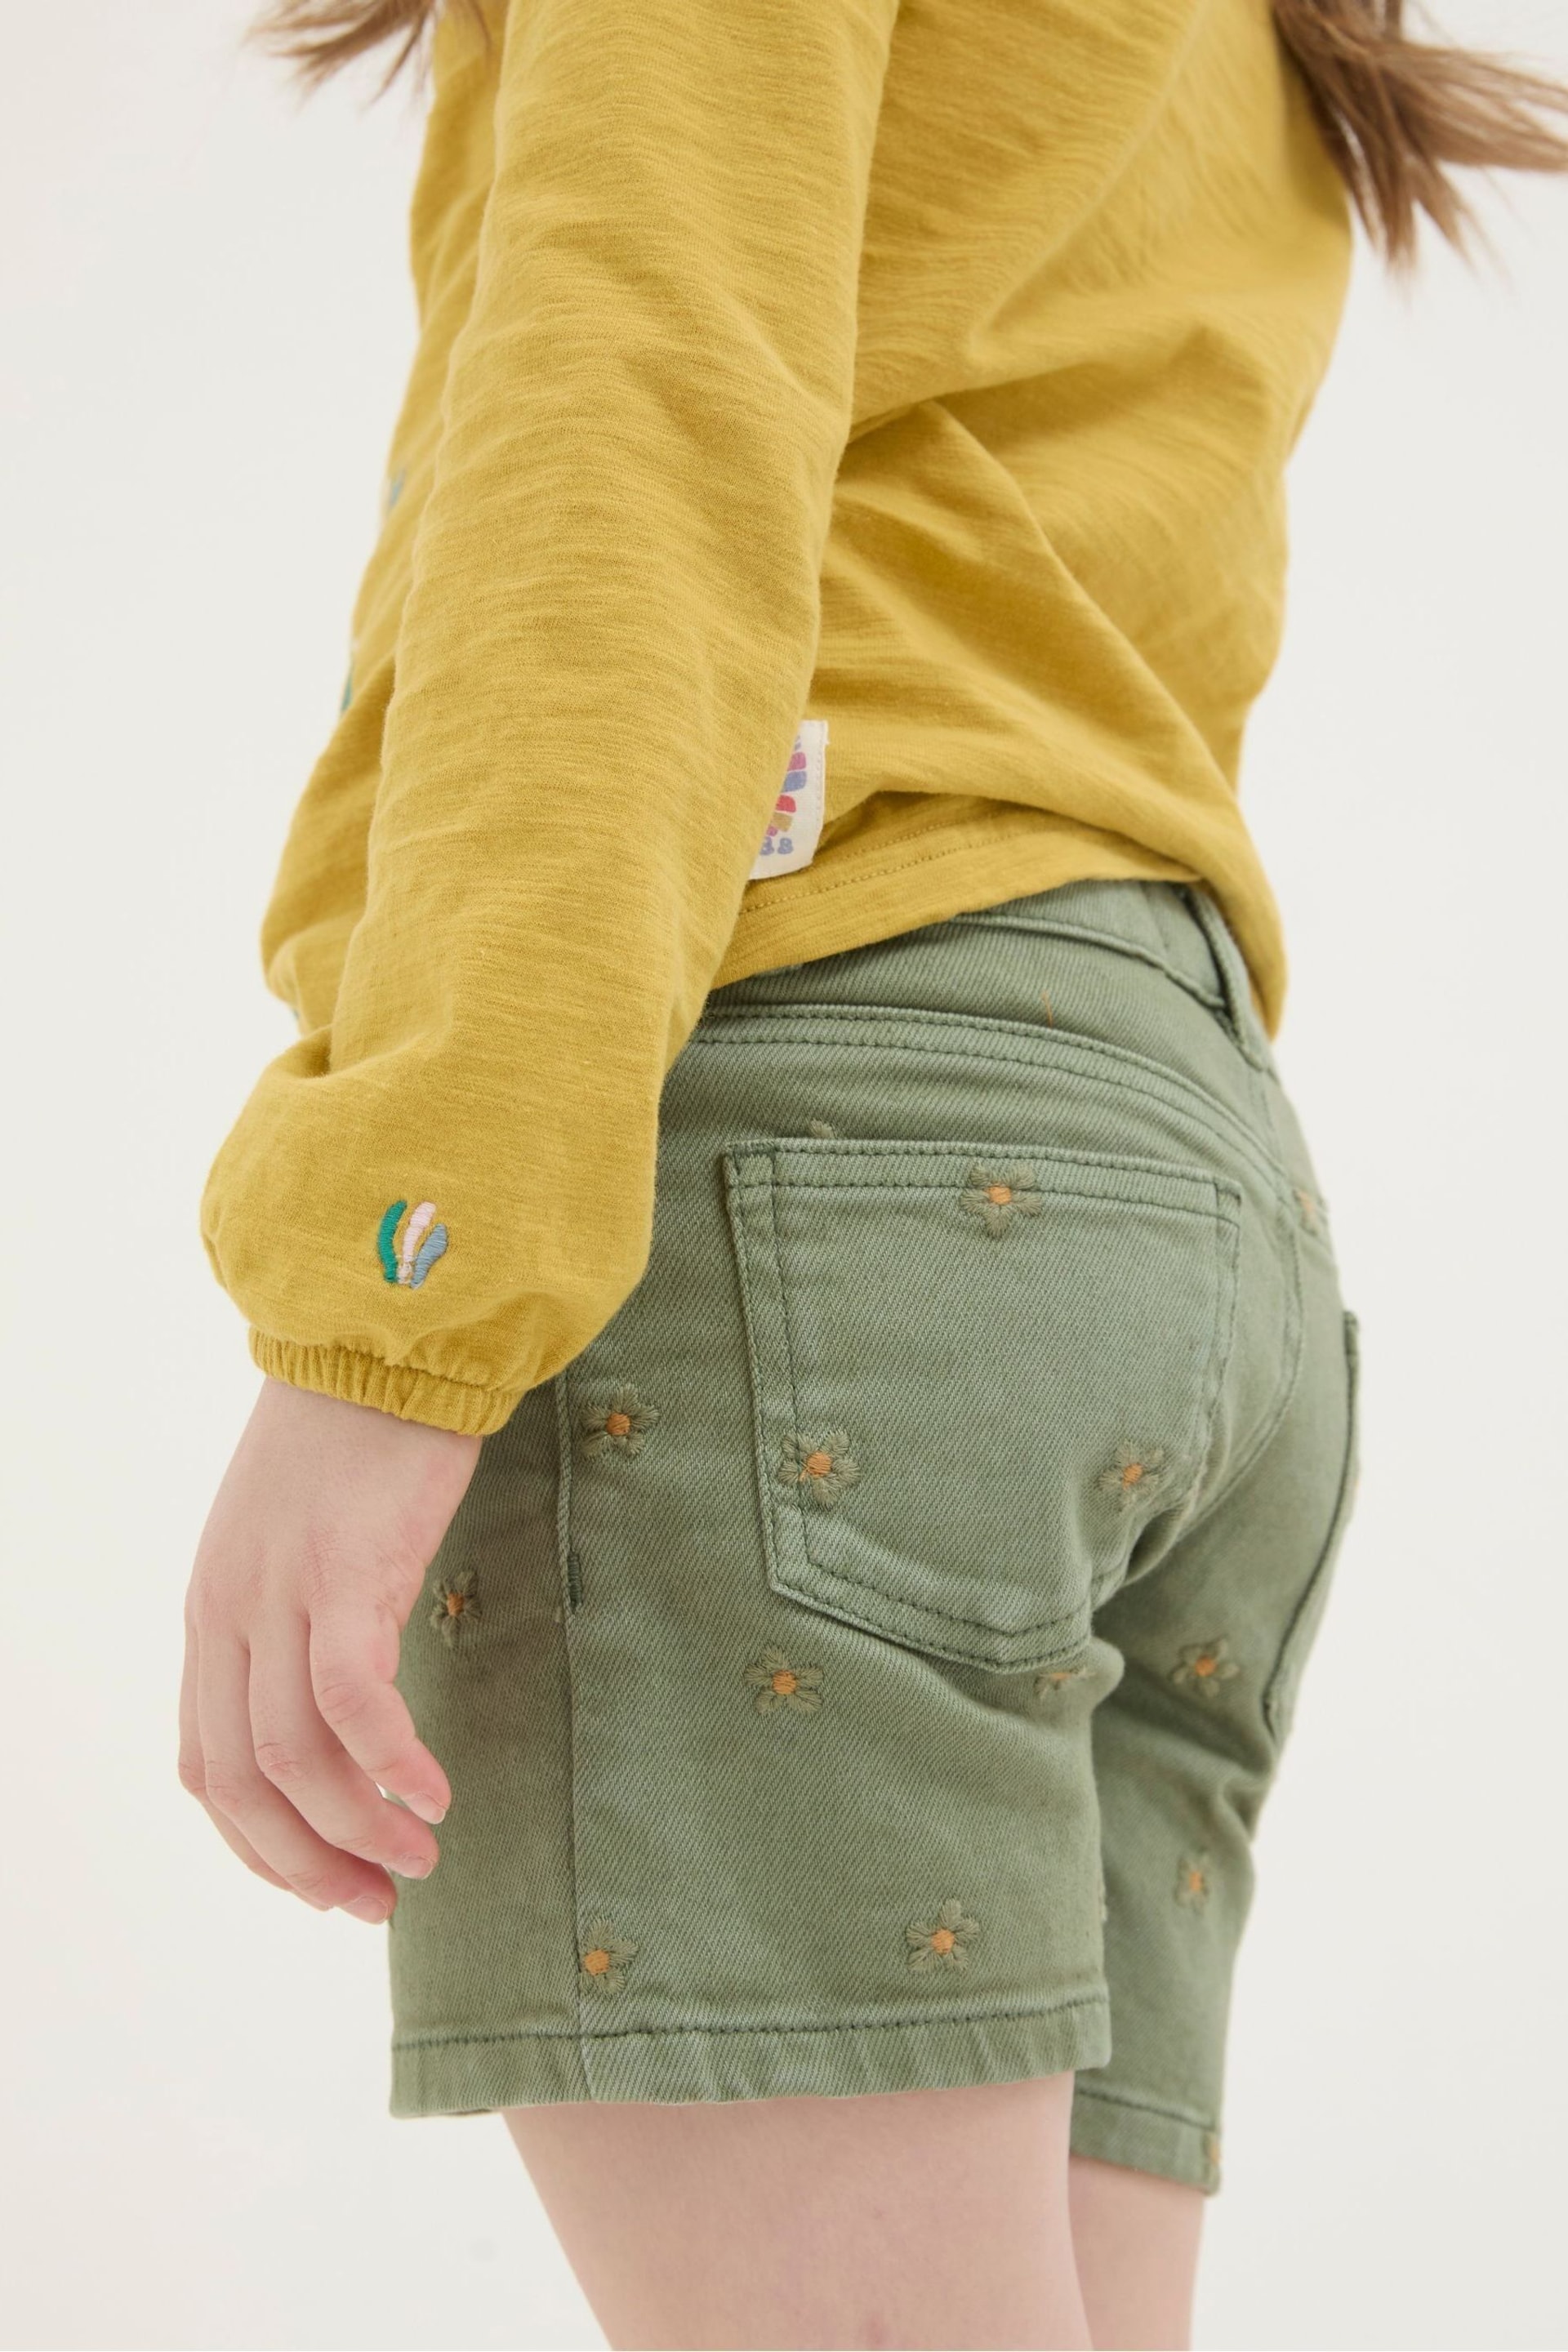 FatFace Green Daisy Embroidered Denim Shorts - Image 2 of 4